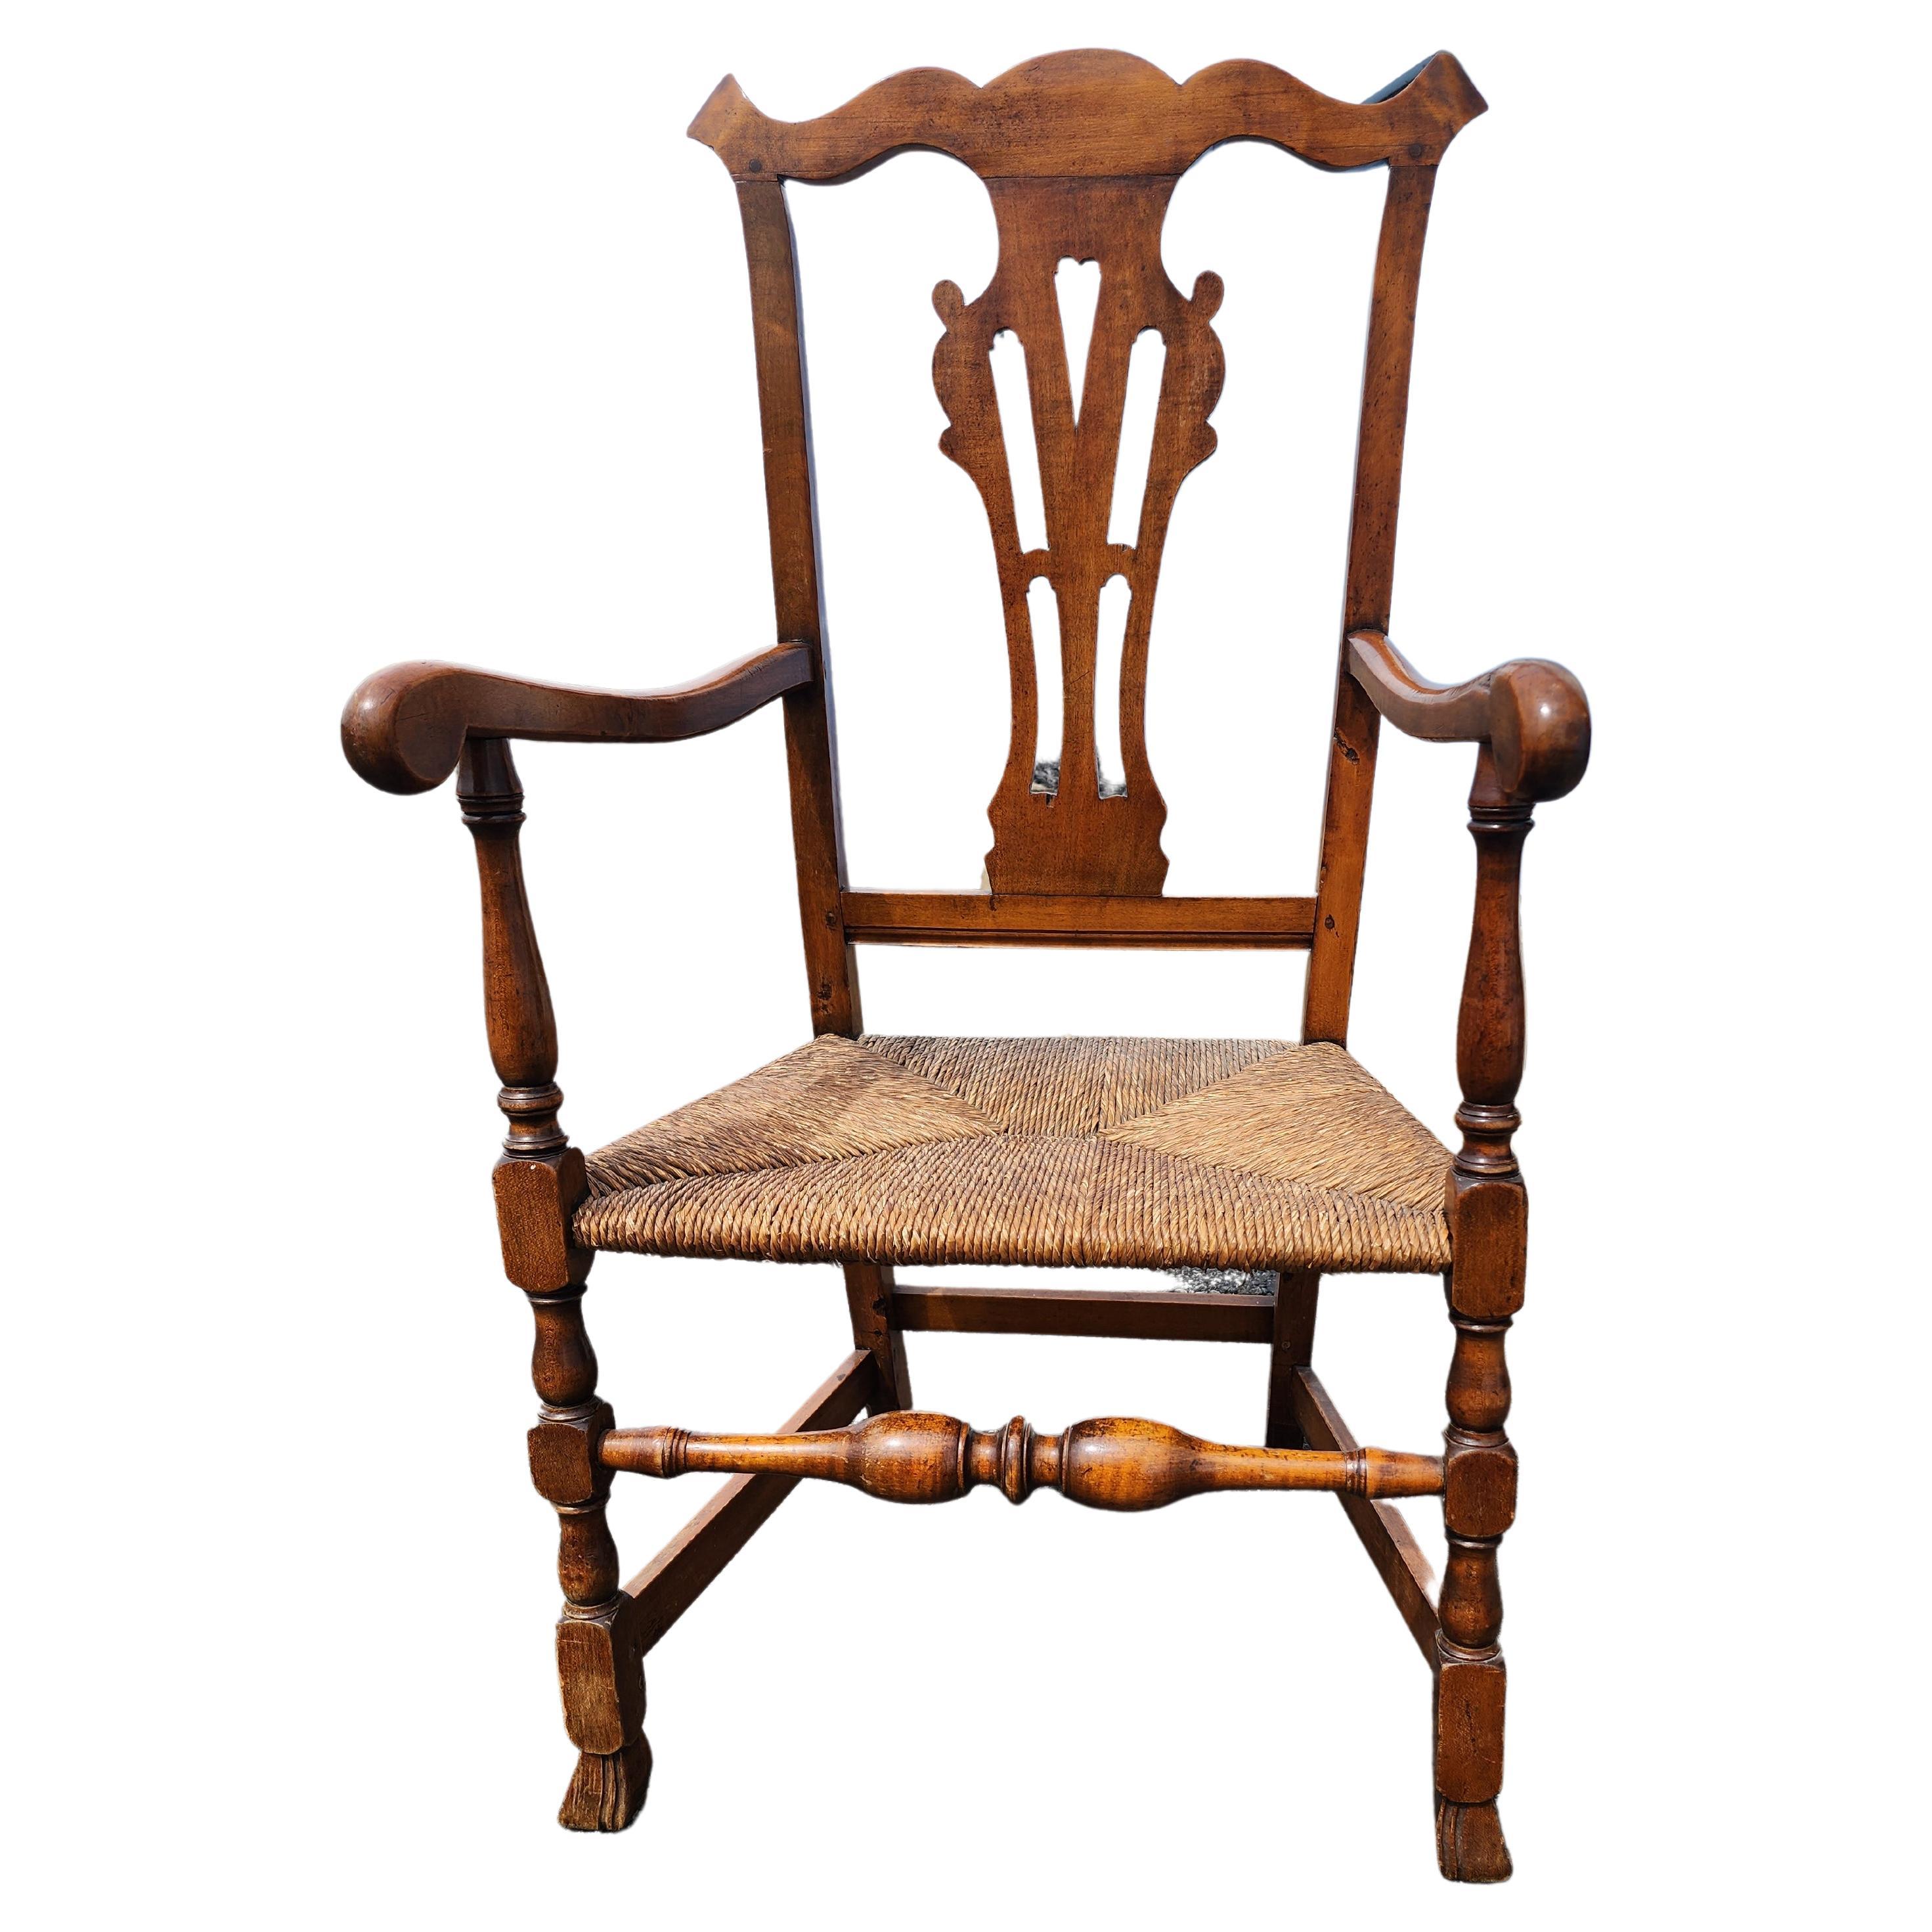 A pierced splat cupid's bow crested Chippendale great chair. This imposing Chippendale arm-chair is made of maple and figured maple. The profile of the crest and its pierced pattern suggest Rhode Island or Connecticut as an origin, as does the